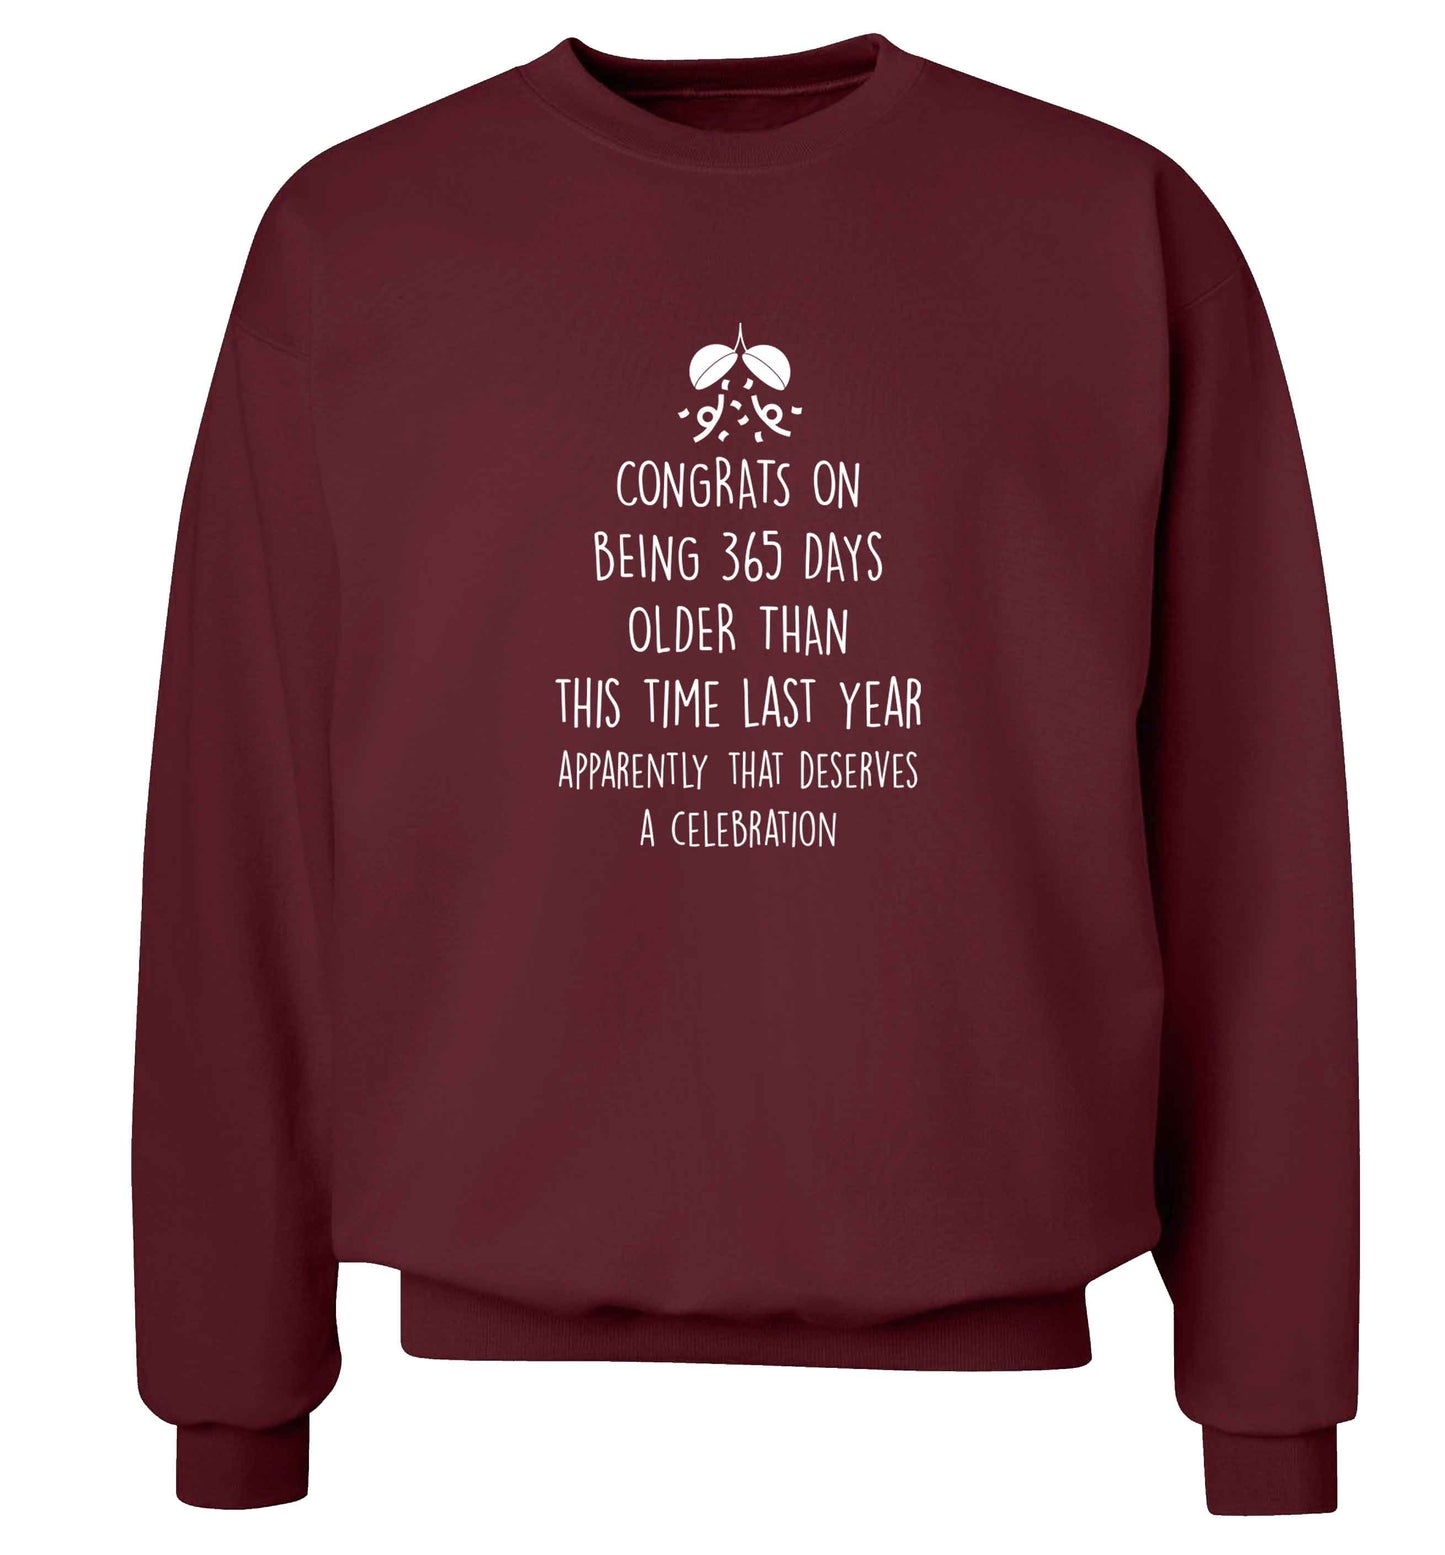 Congrats on being 365 days older than you were this time last year apparently that deserves a celebration adult's unisex maroon sweater 2XL